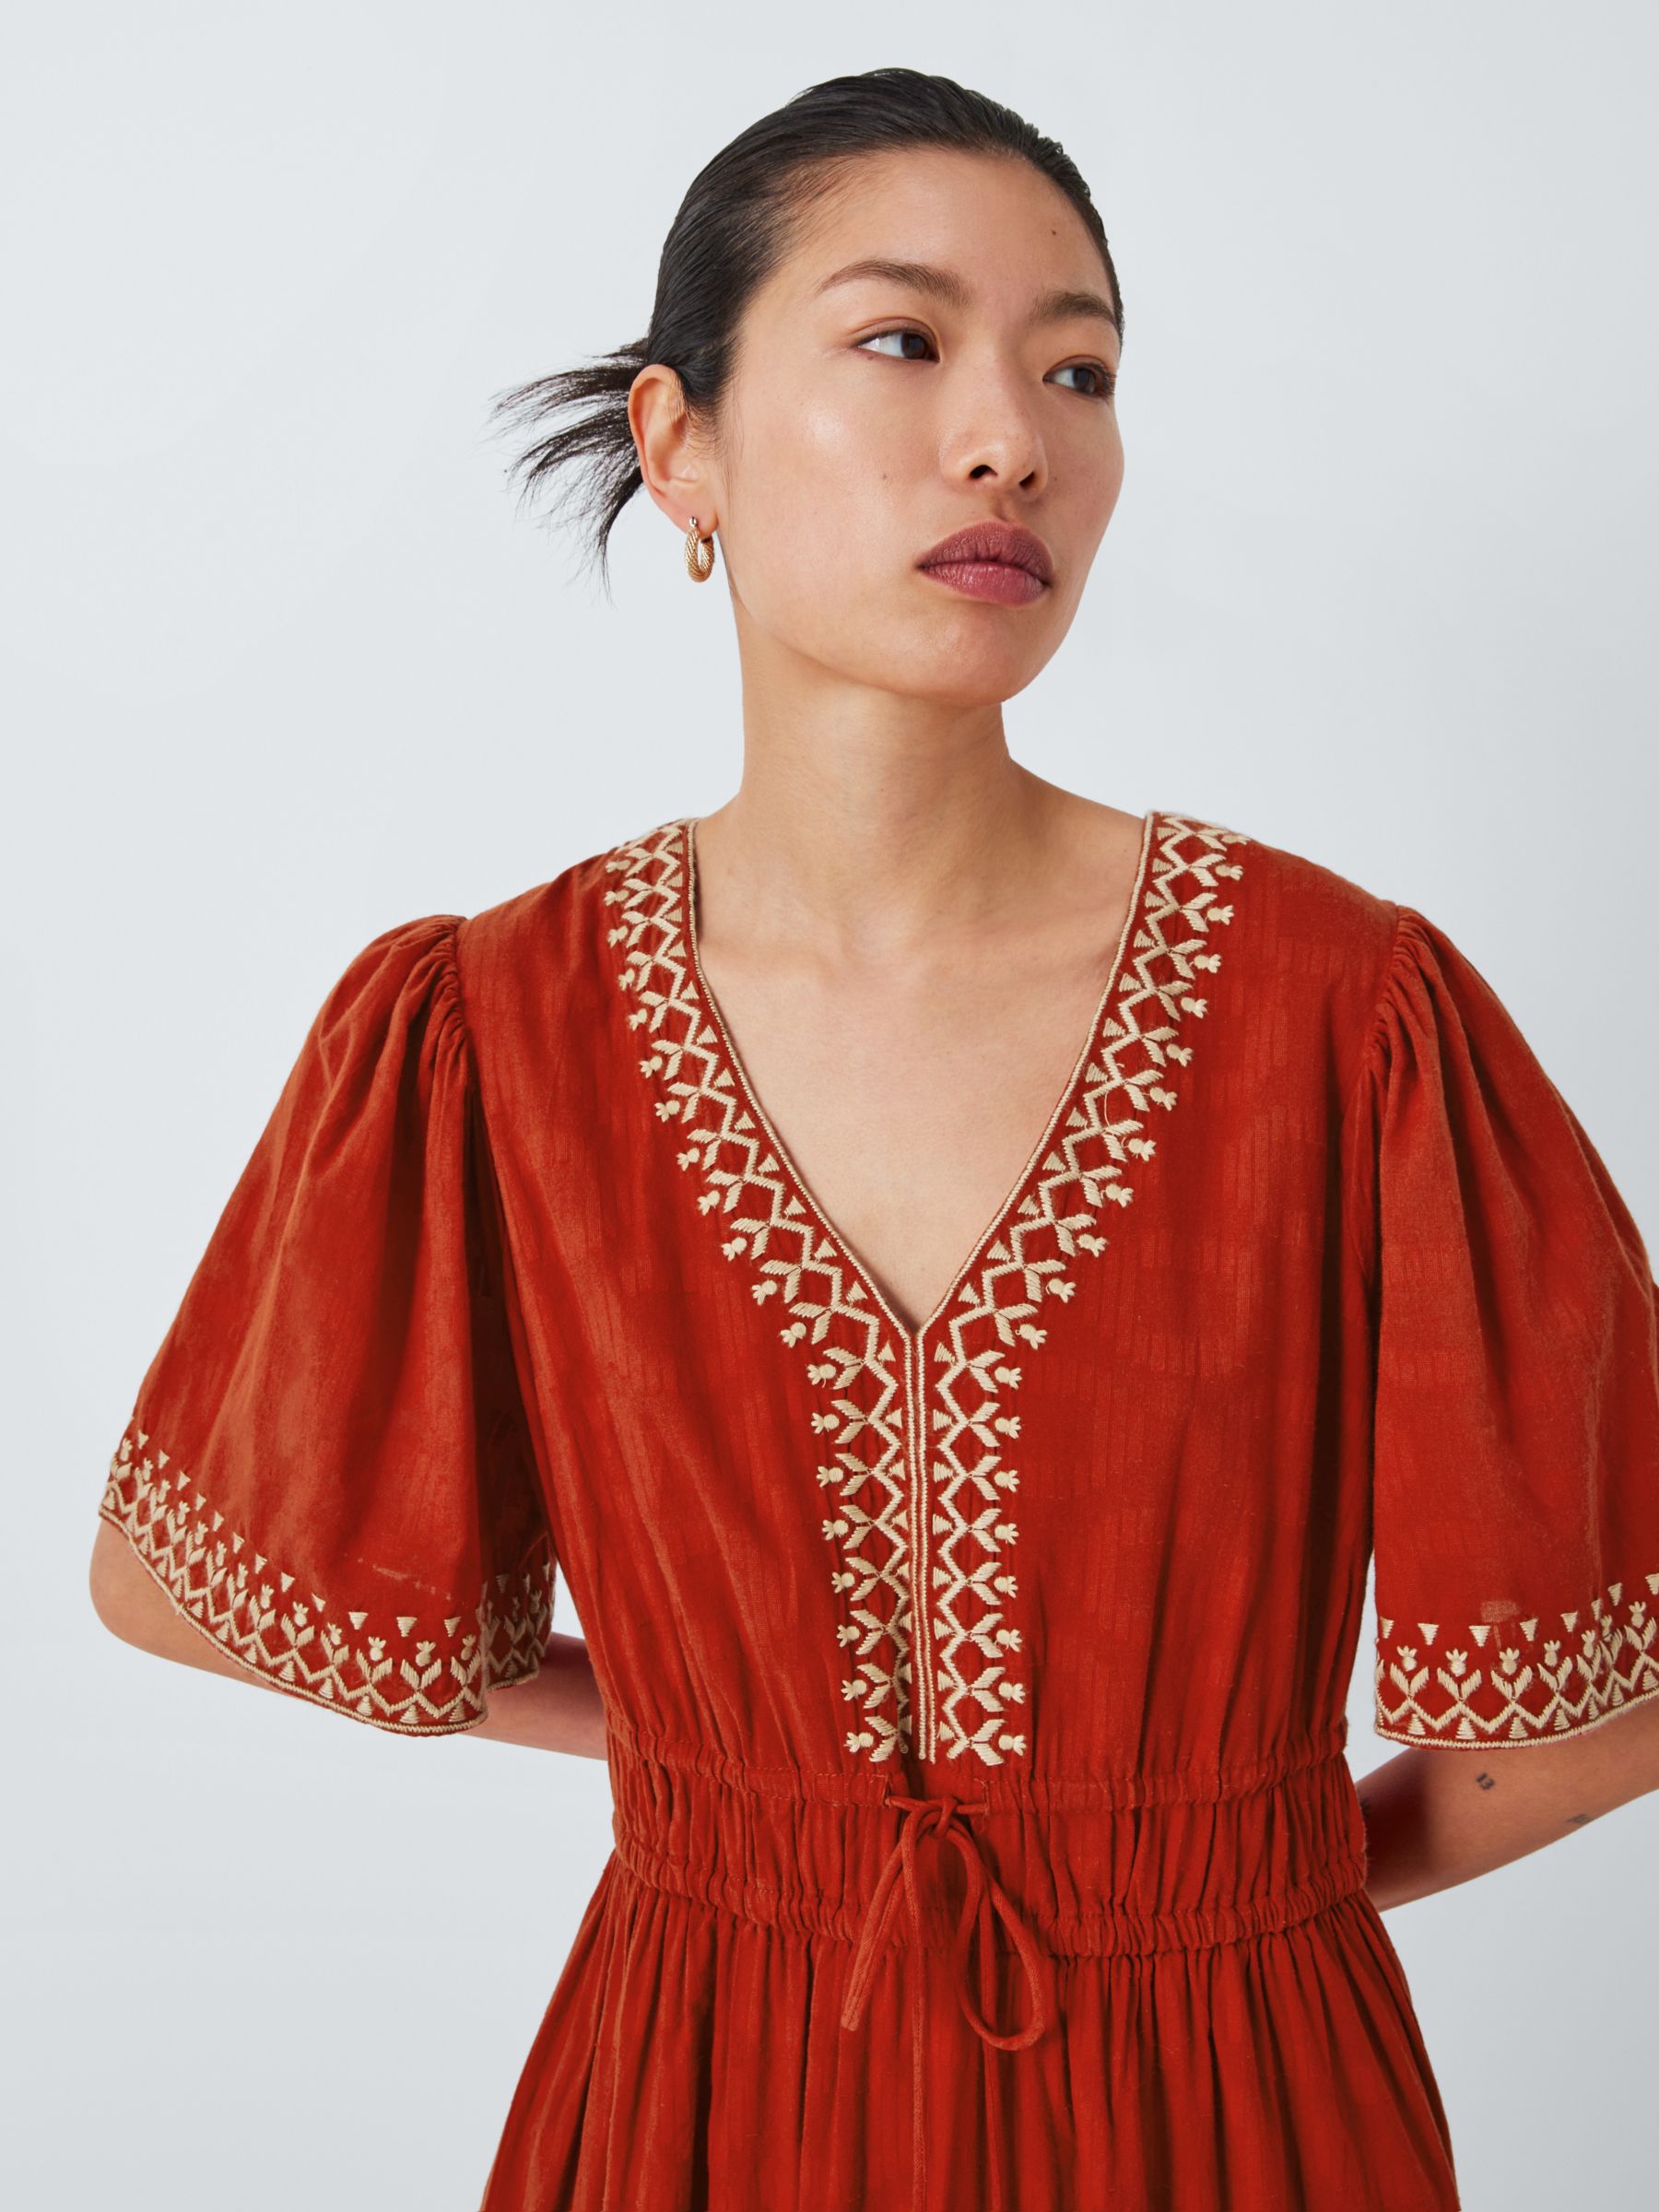 AND/OR Gianna Embroidered Dress, Rust, 6